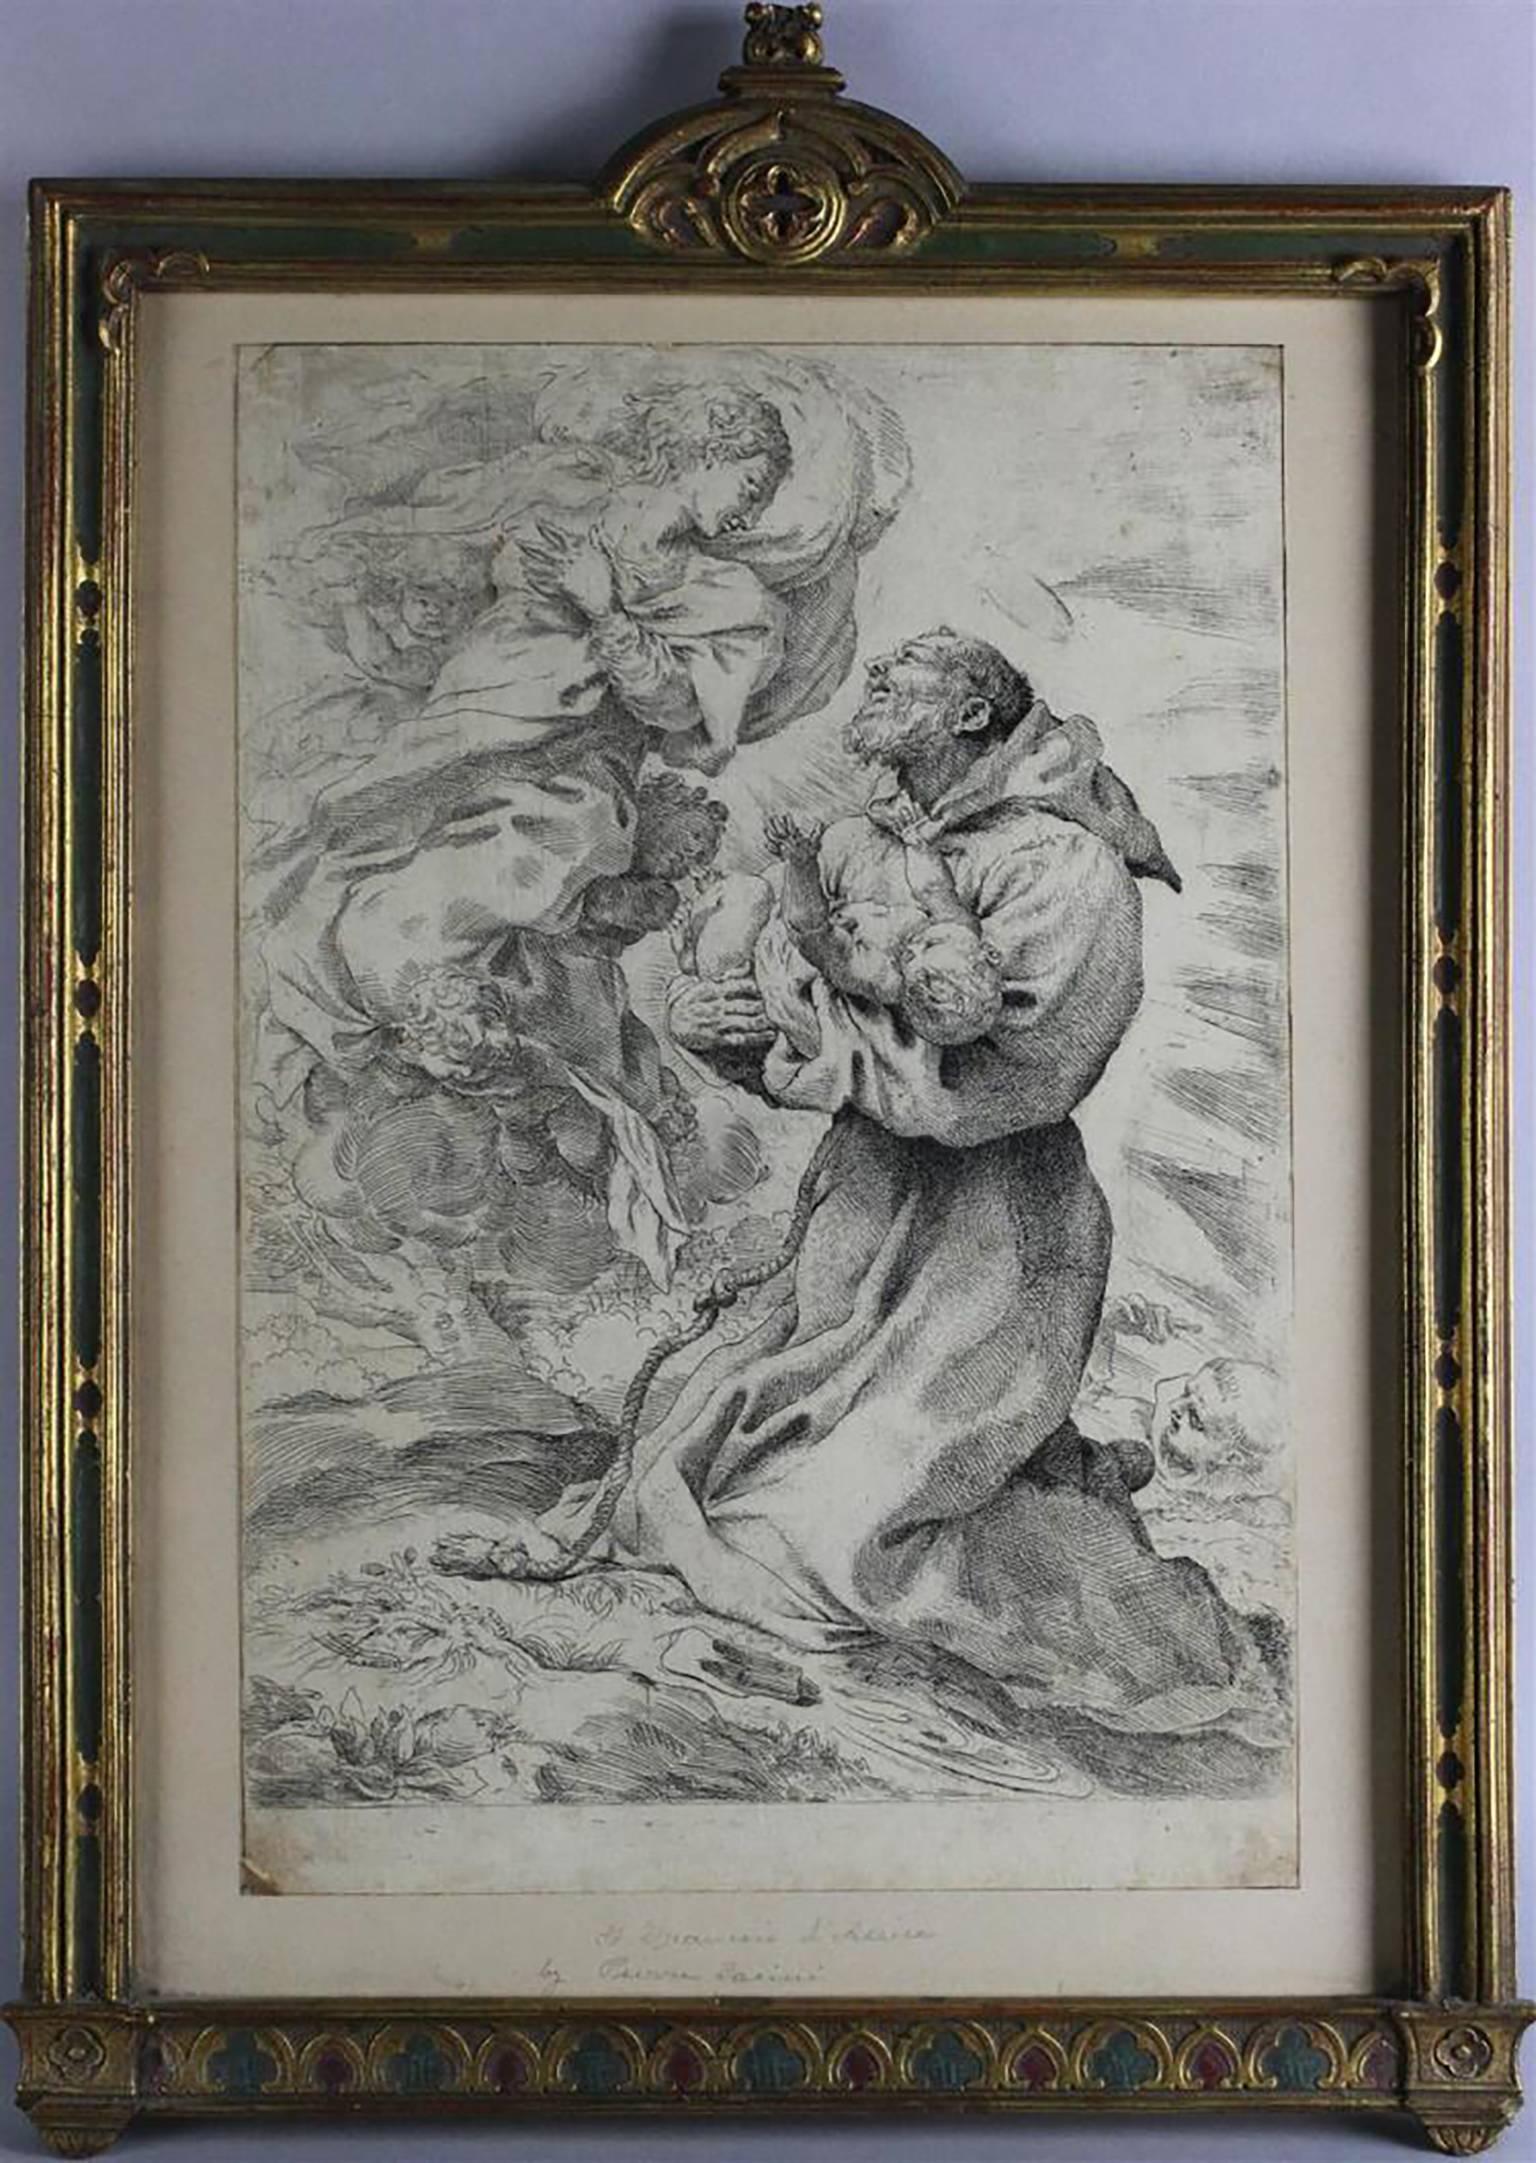 PIETRO FACCINI (Bologne, Italy 1562-1602) Copper Plate Etching, Entitled VISION OF ST. FRANCIS engraved by Faccini himself in 1590. The etching’s Image measures 14 x 9.5; with Frame 16 x 10.5. The Etching is believed to have been created by Faccini